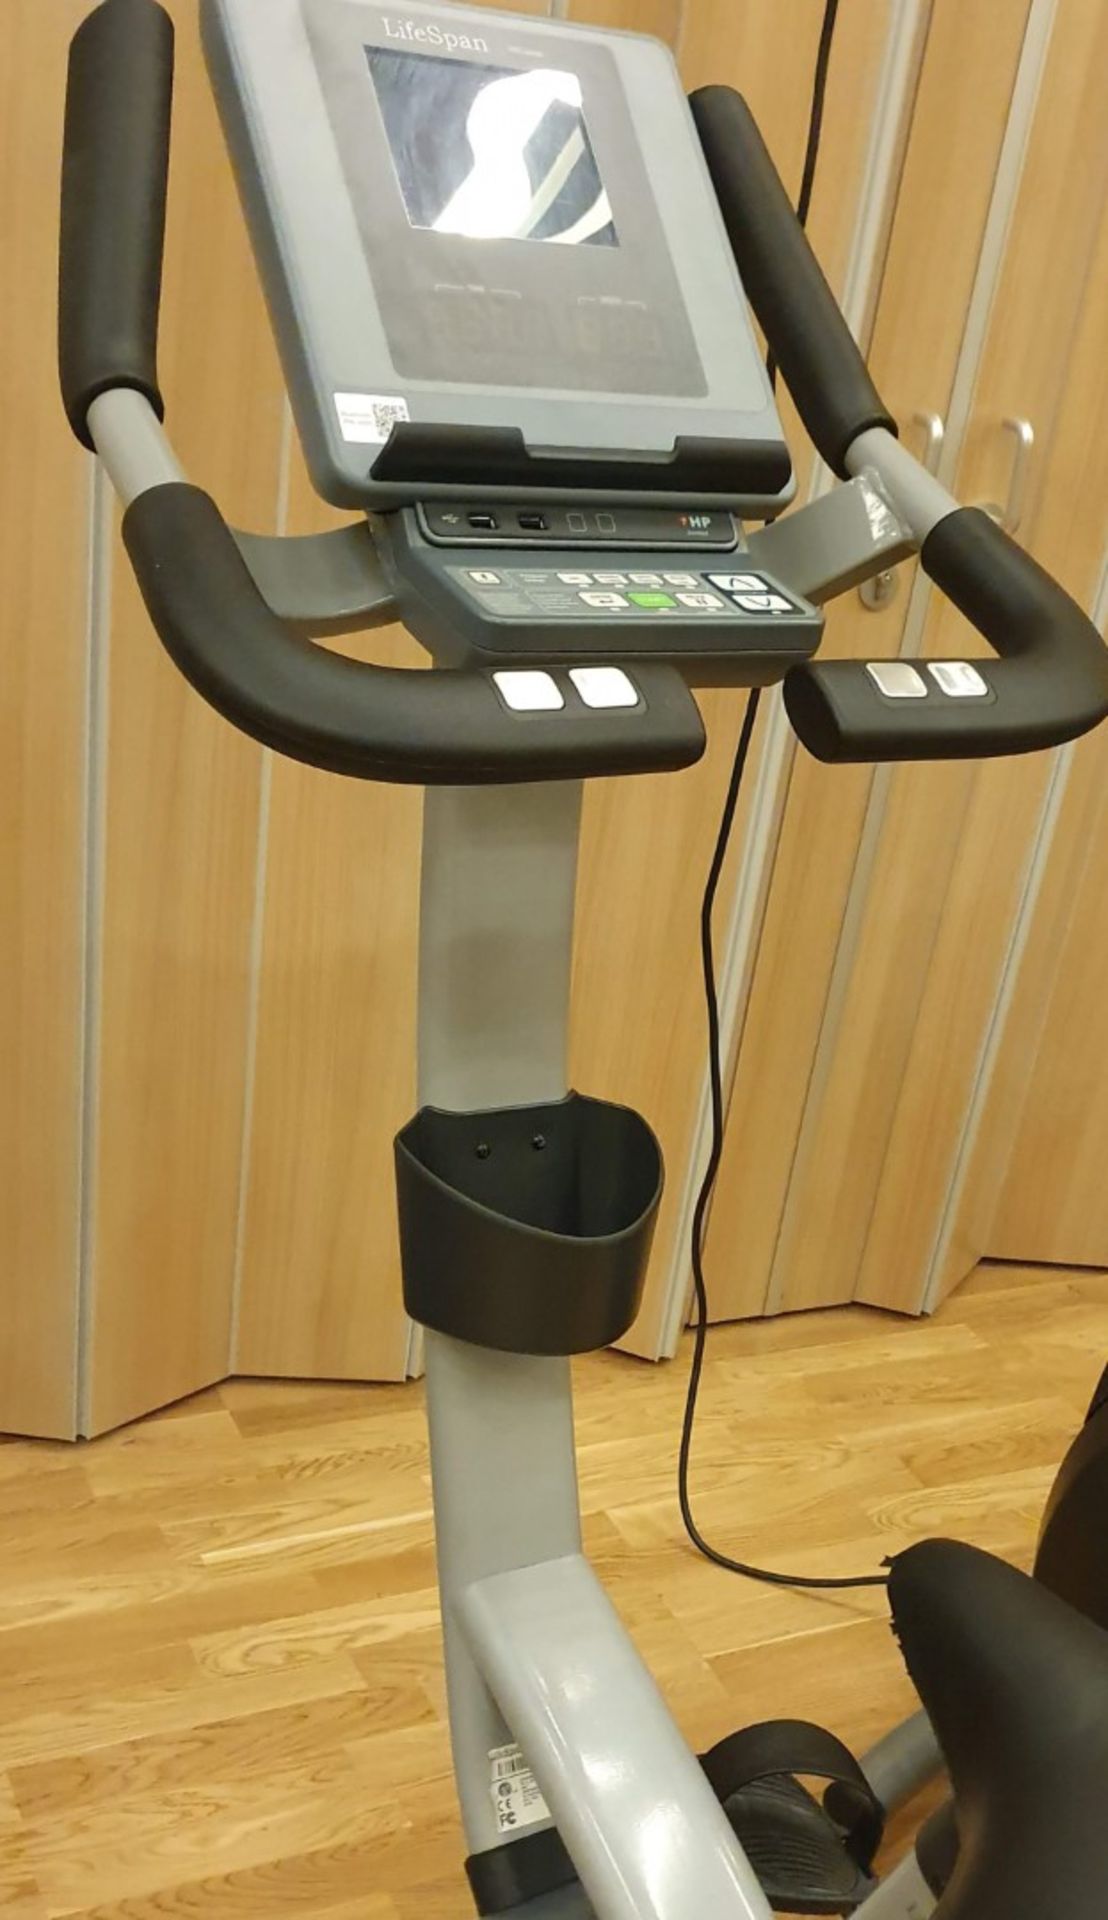 1 x Lifespan C7000 Pro Series Exercise Bike With USB Connectivity - Approx RRP £1,400 - CL552 - - Image 5 of 6